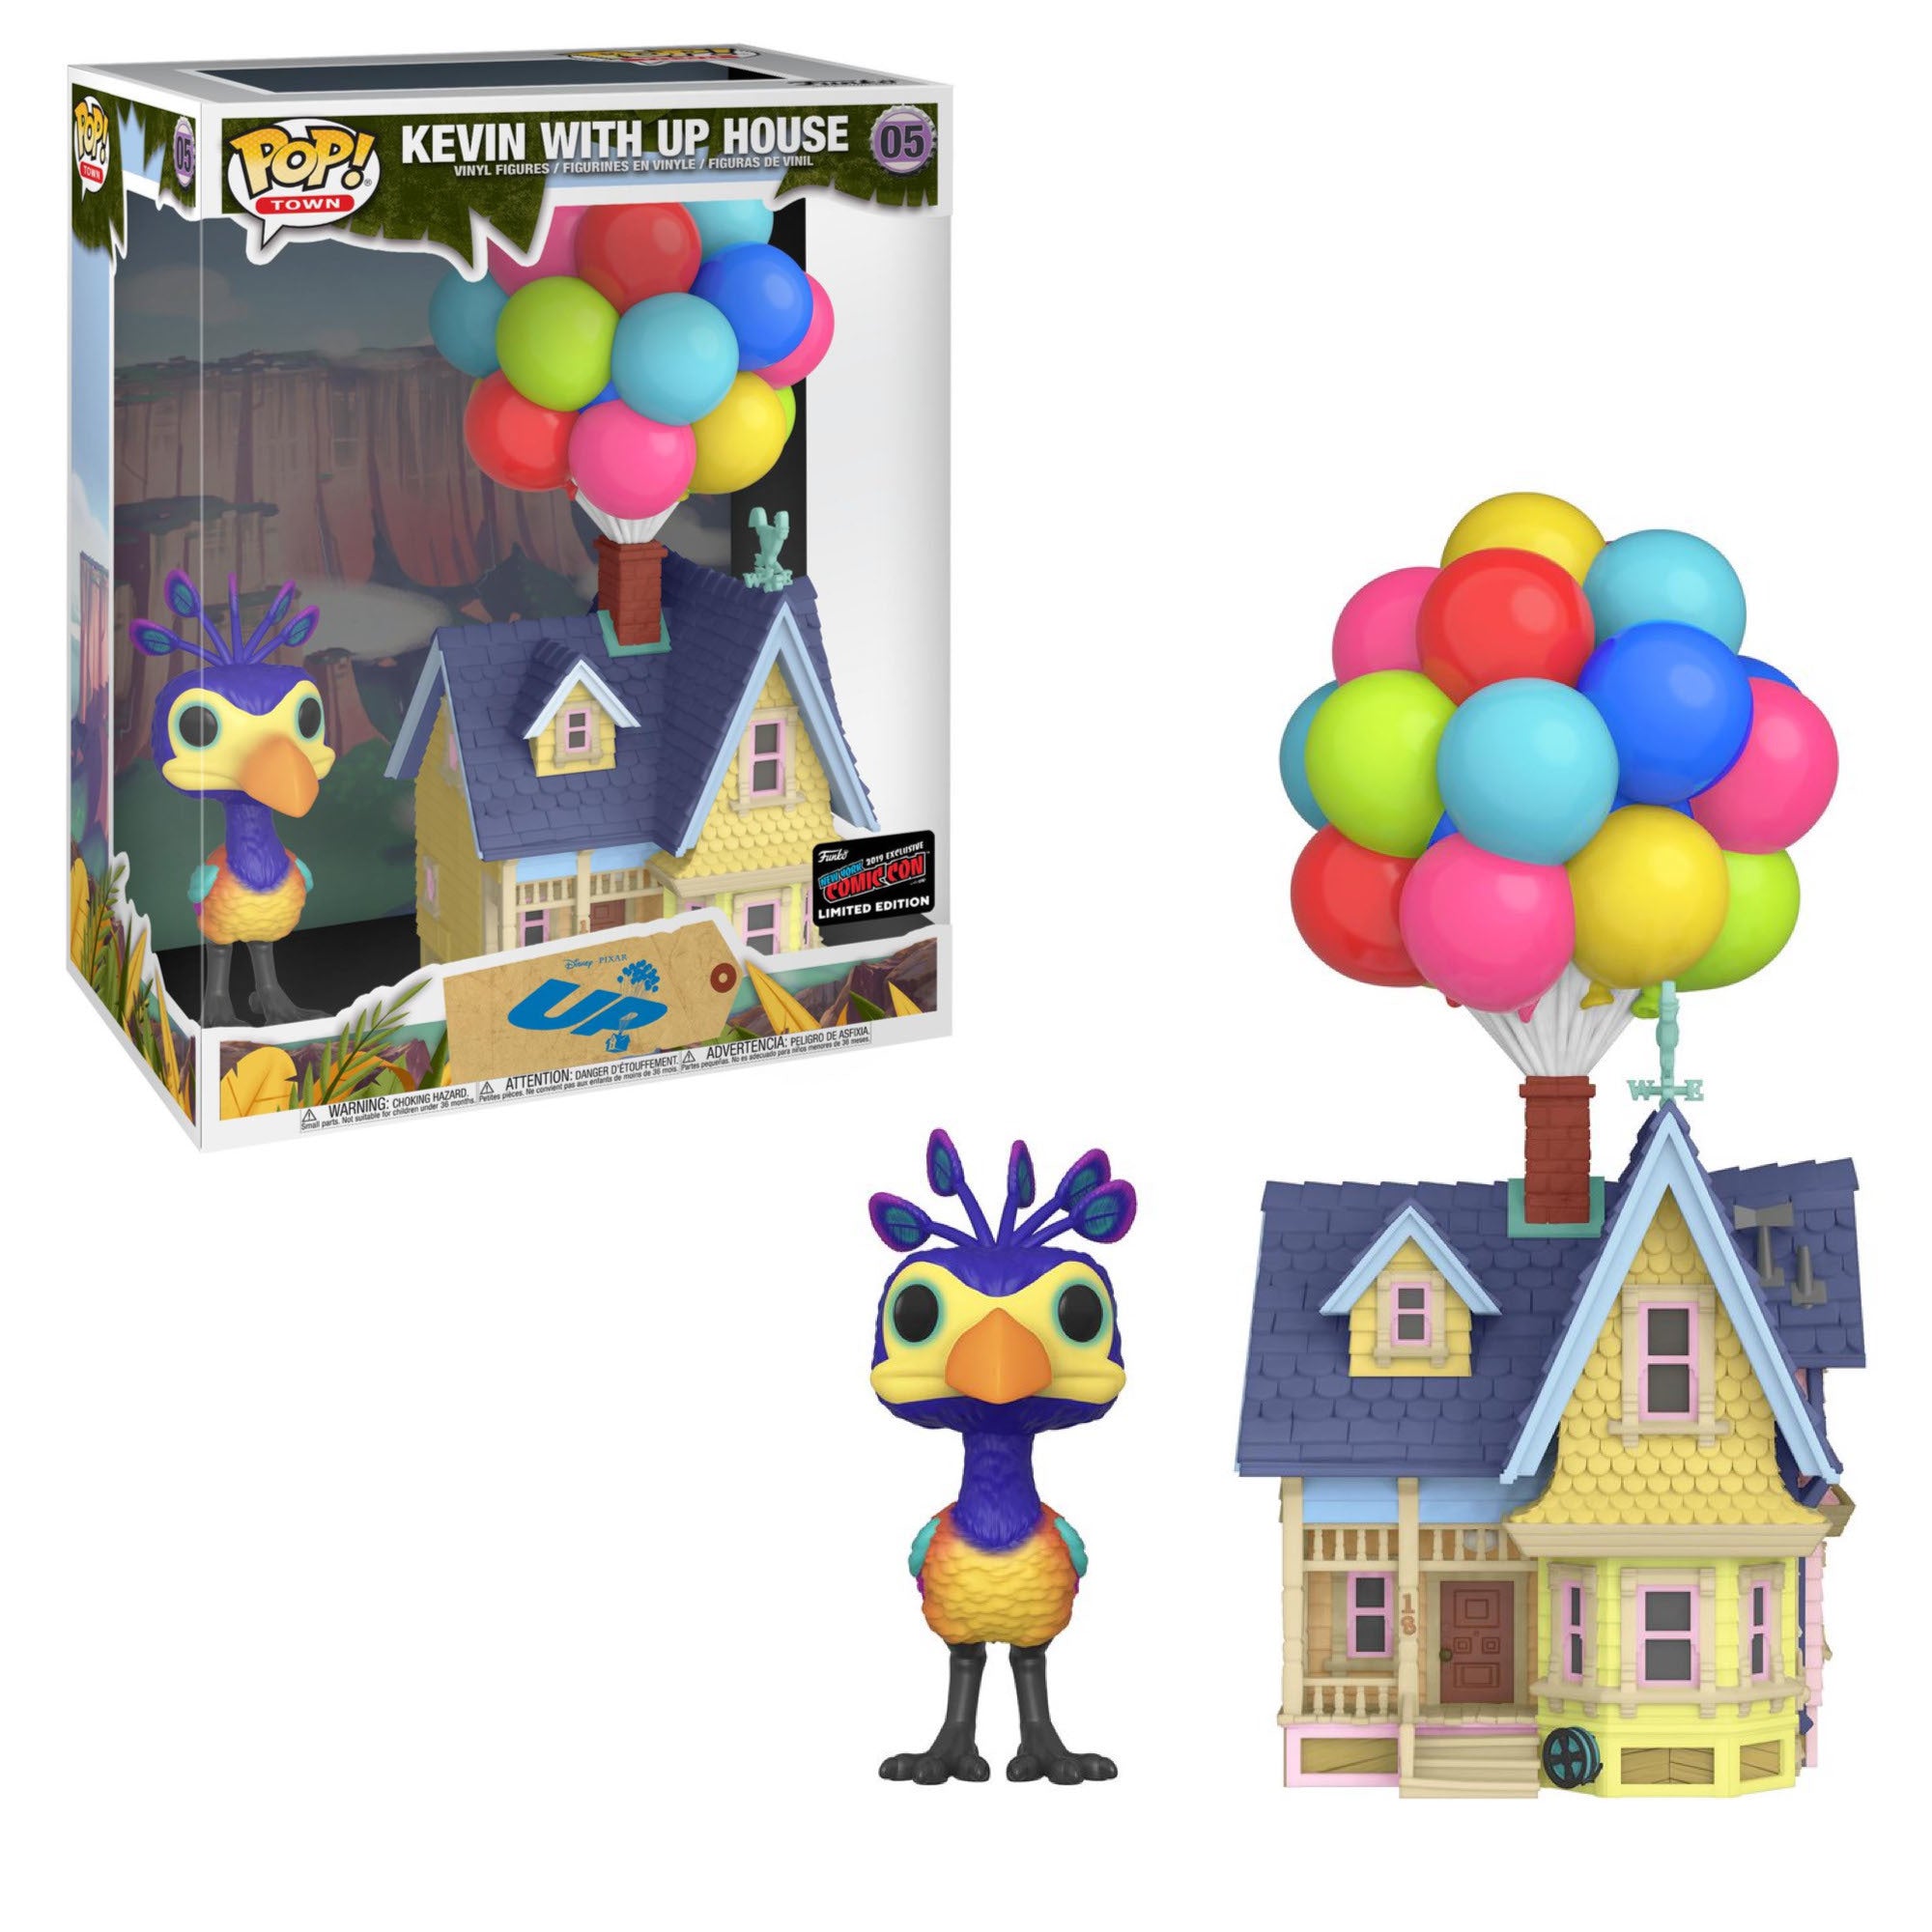 Funko POP! Town Disney Pixar Kevin with Up House #05 NYCC 2019 Limited Edition Convention Sticker Exclusive